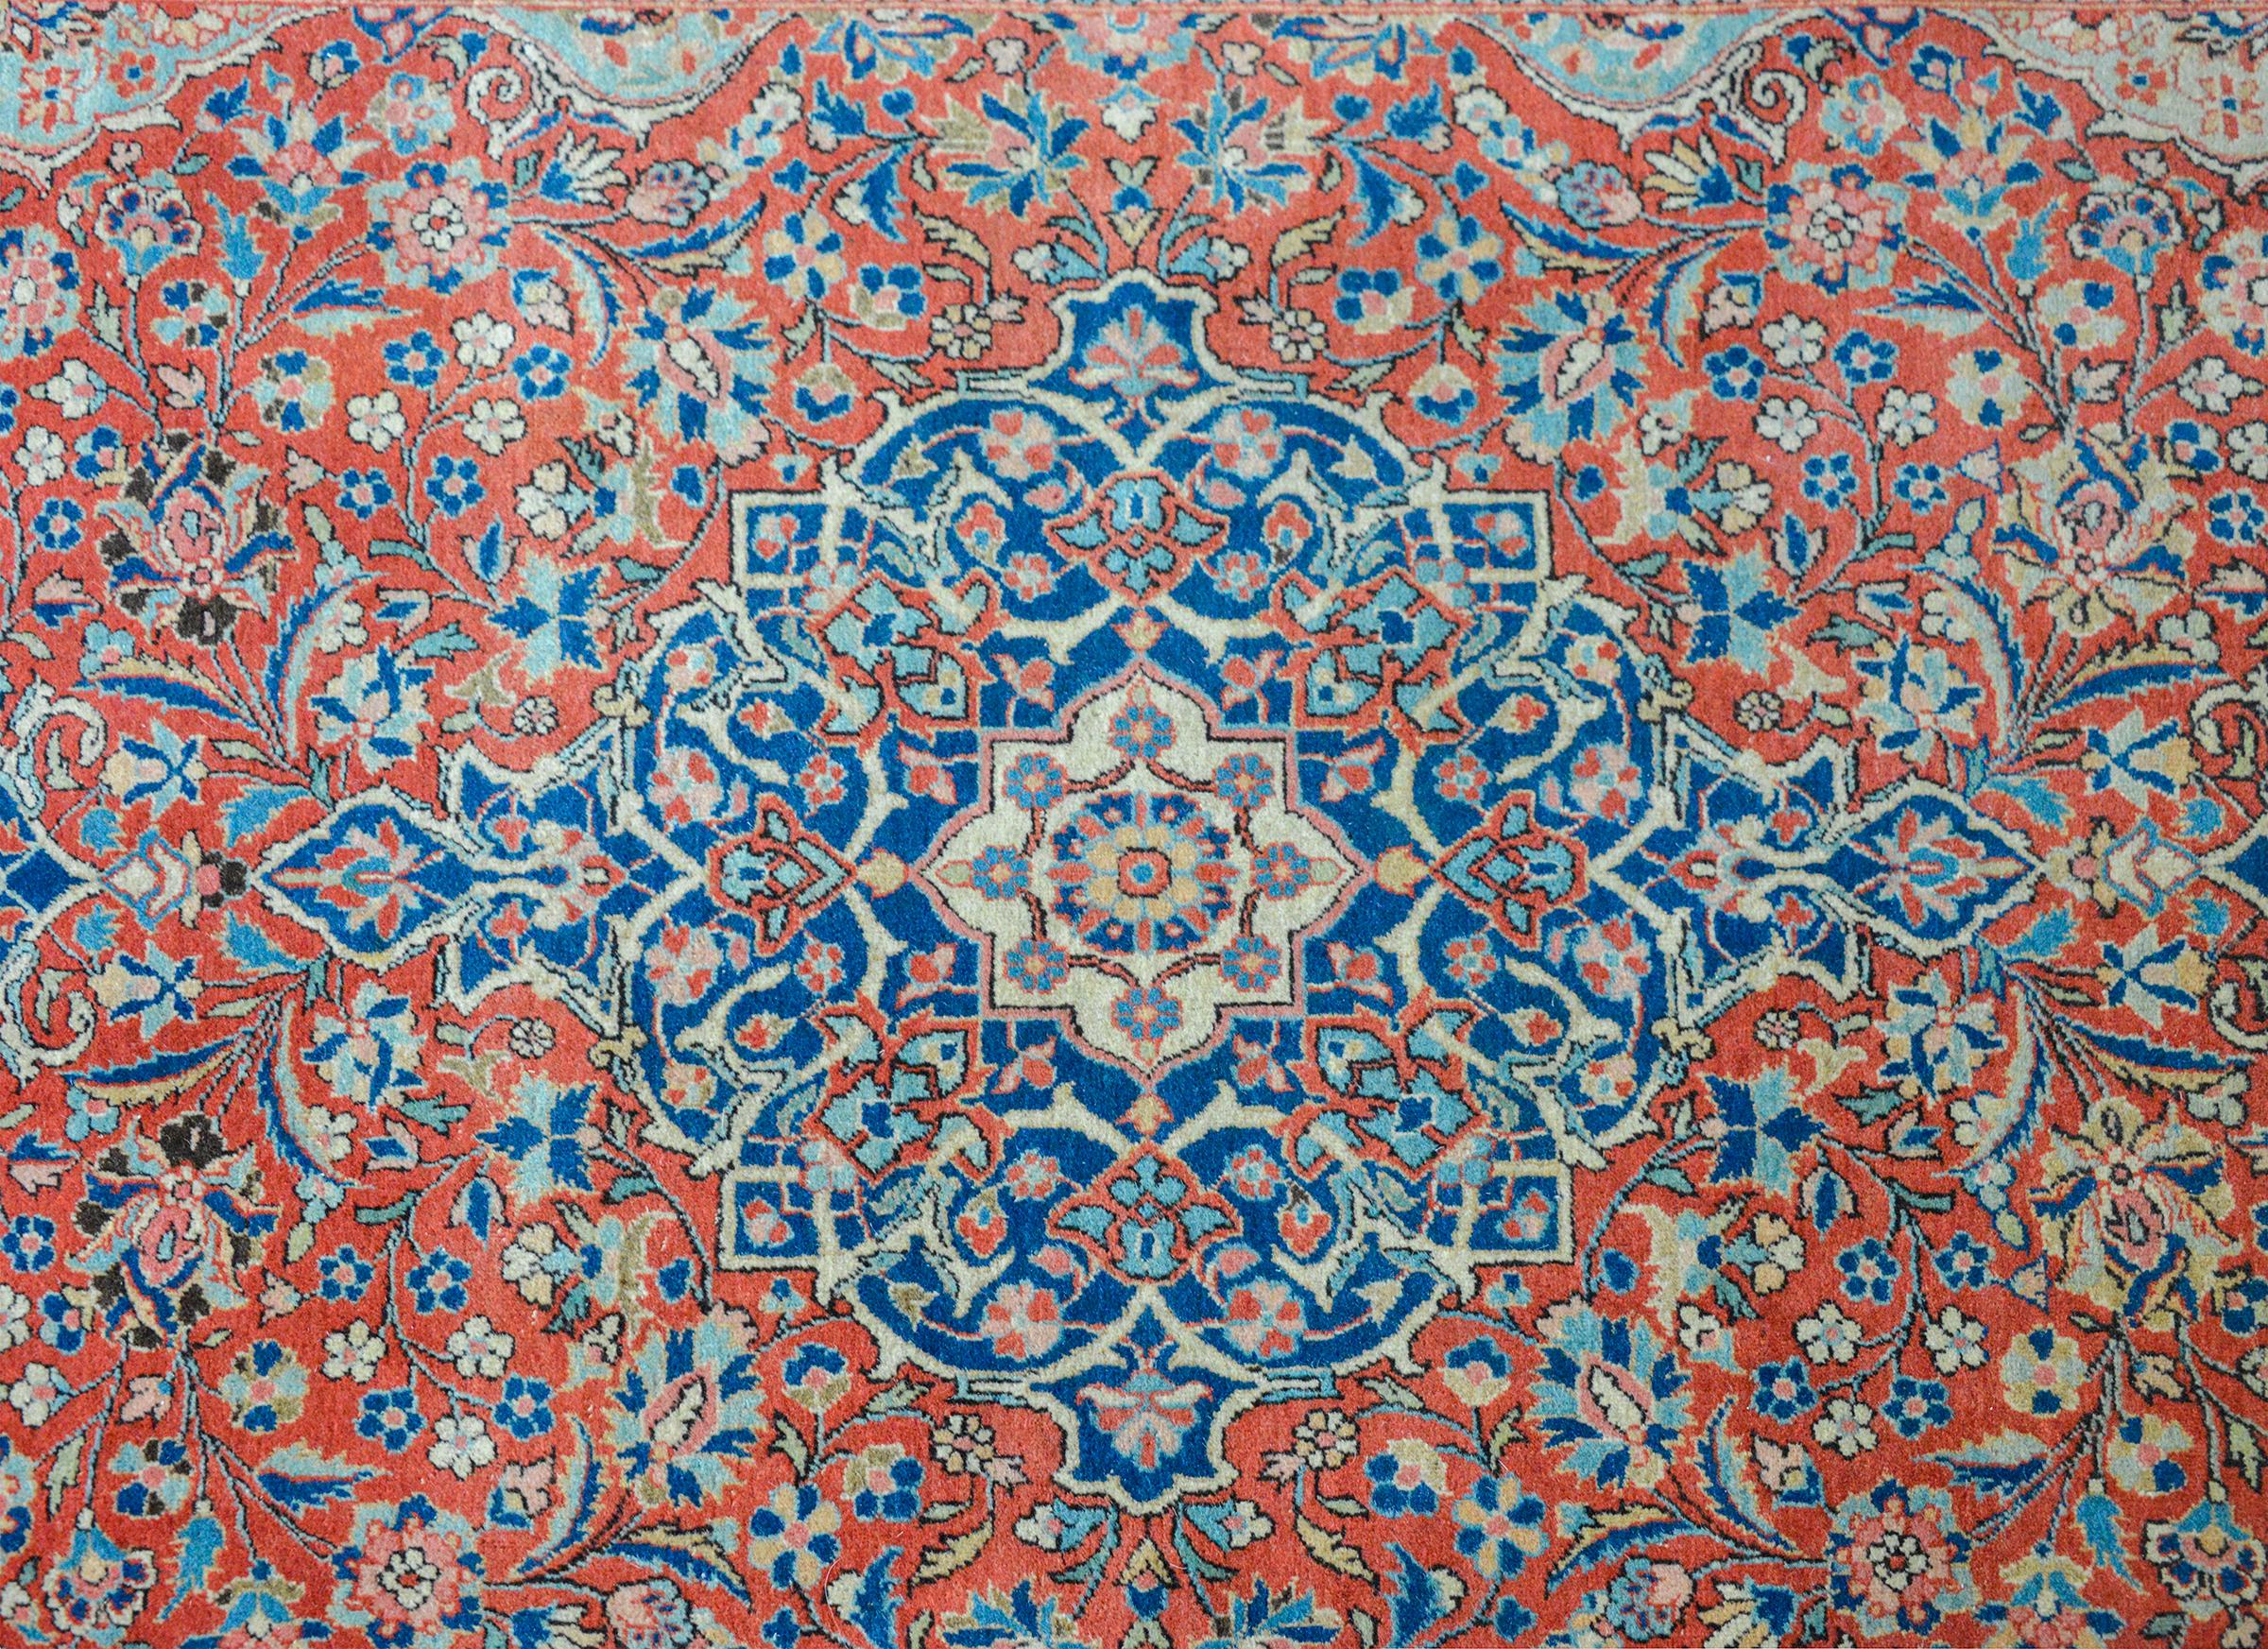 An extraordinary early 20th century Persian Kashan rug with an intricately woven pattern with a central medallion living amidst a field of scrolling vines and flowers, all woven in light and dark indigo, pink, gold, and cream against a crimson